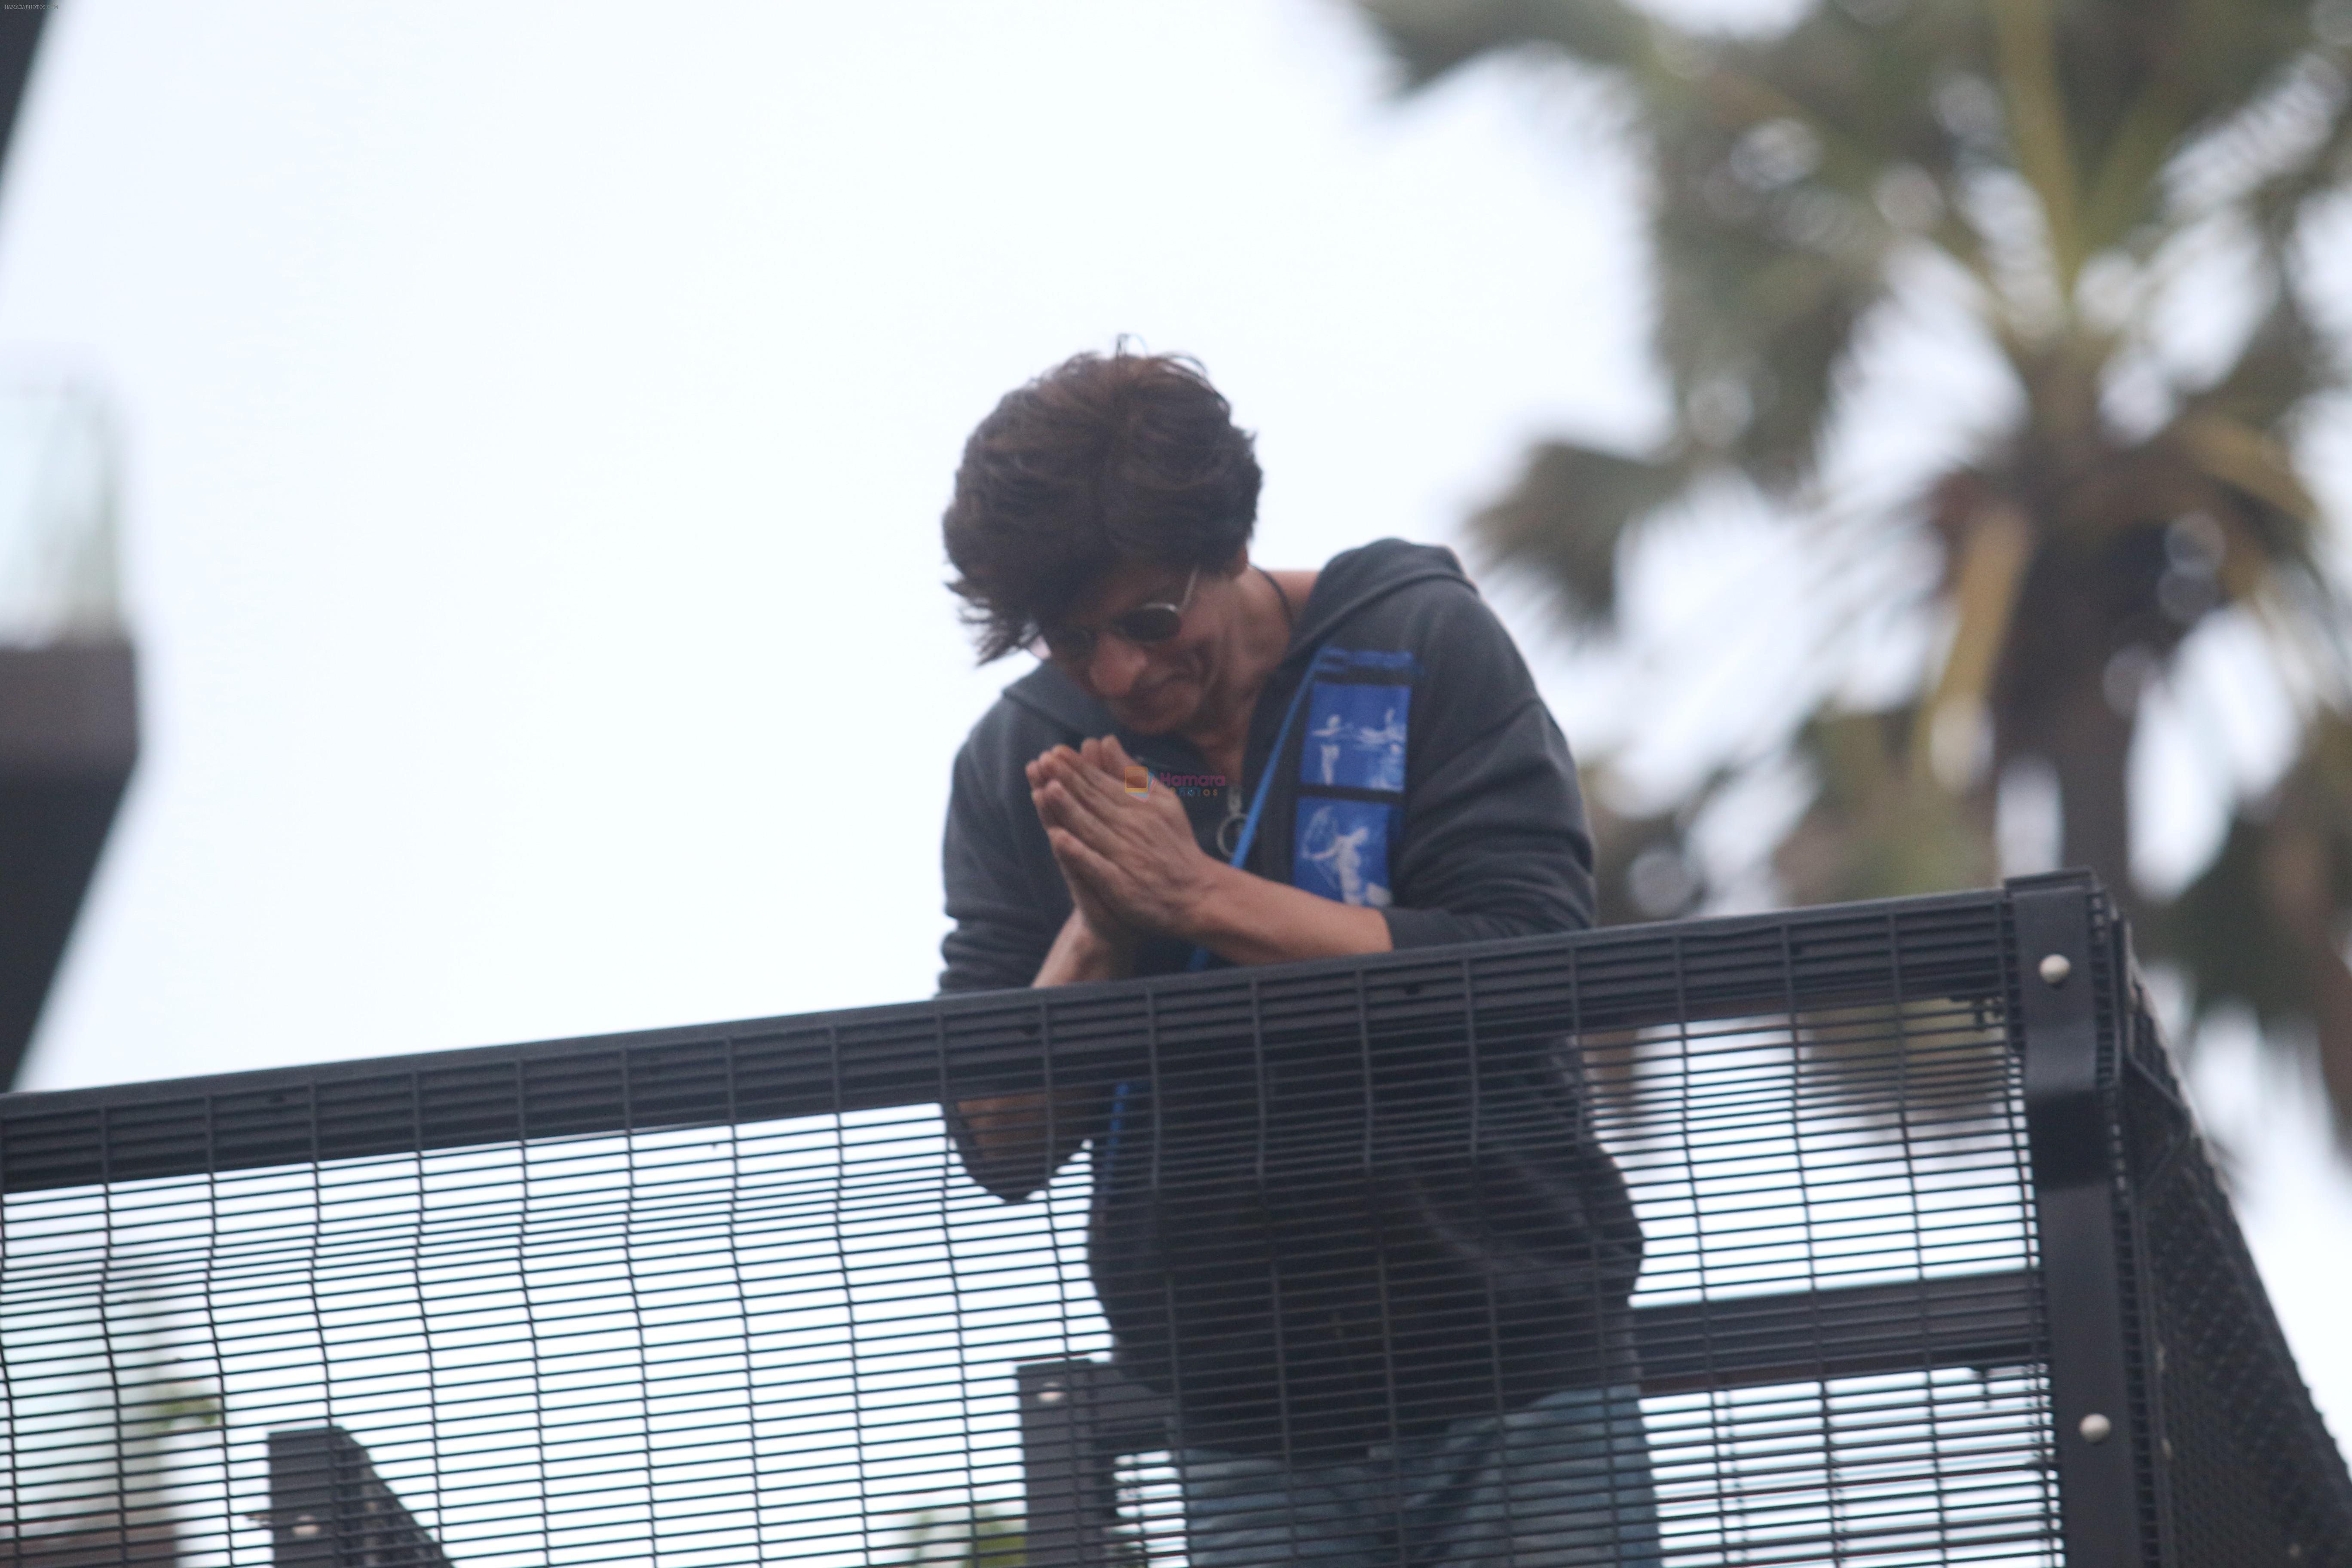 Shahrukh Khan waves to fans on the occasion of Eid at his bandra residence on 12th Aug 2019